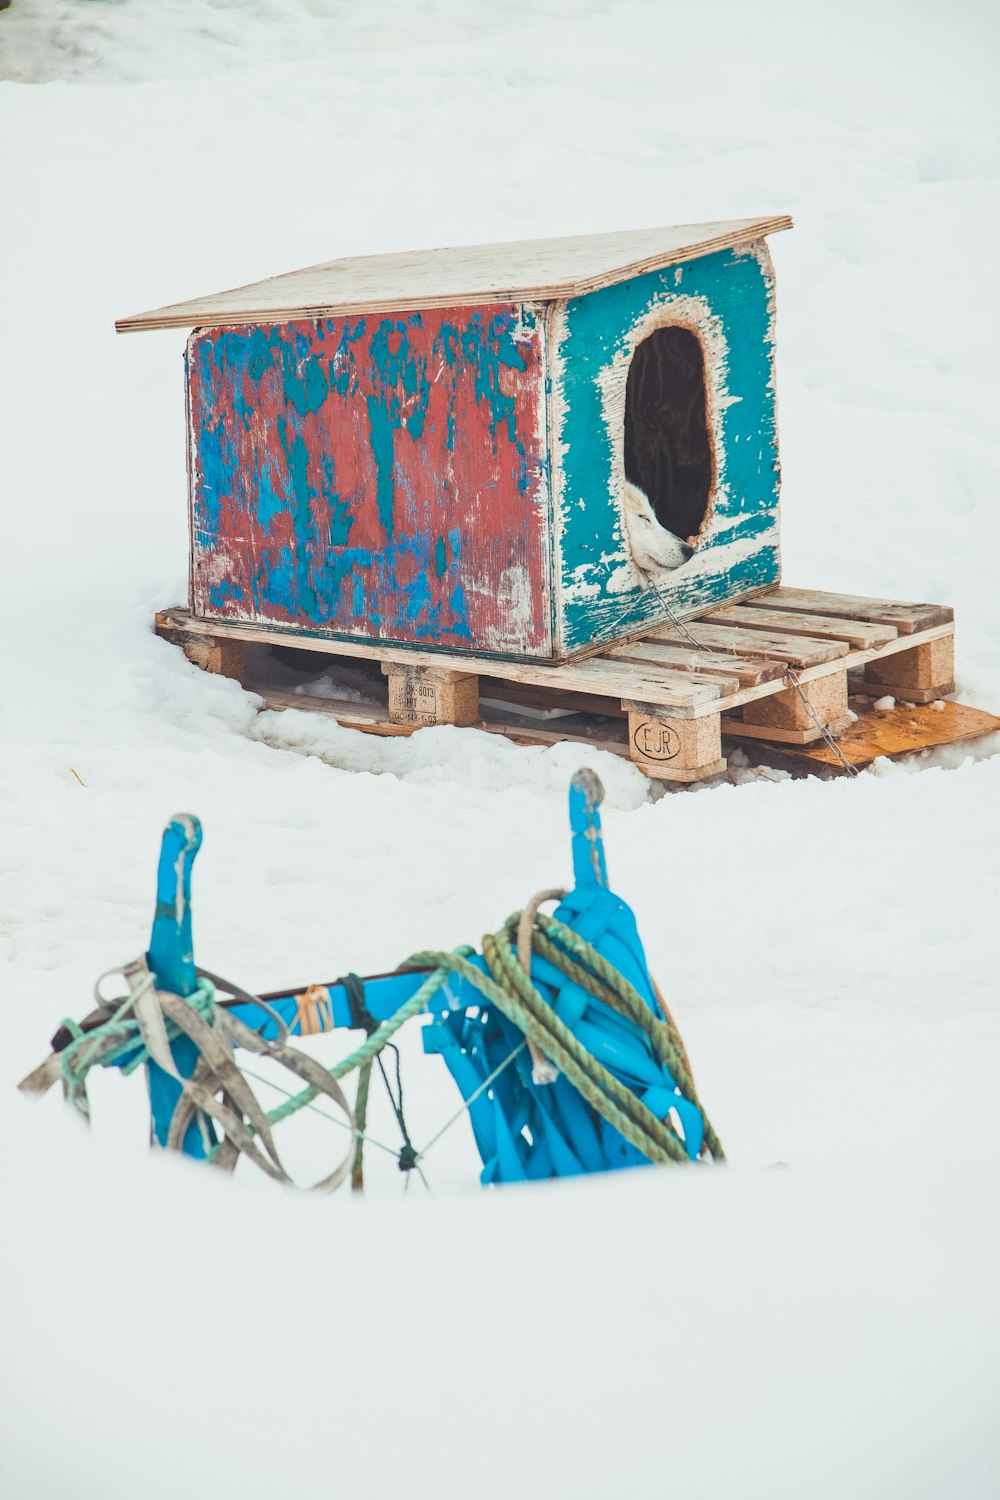 a dog house made out of pallets in the snow